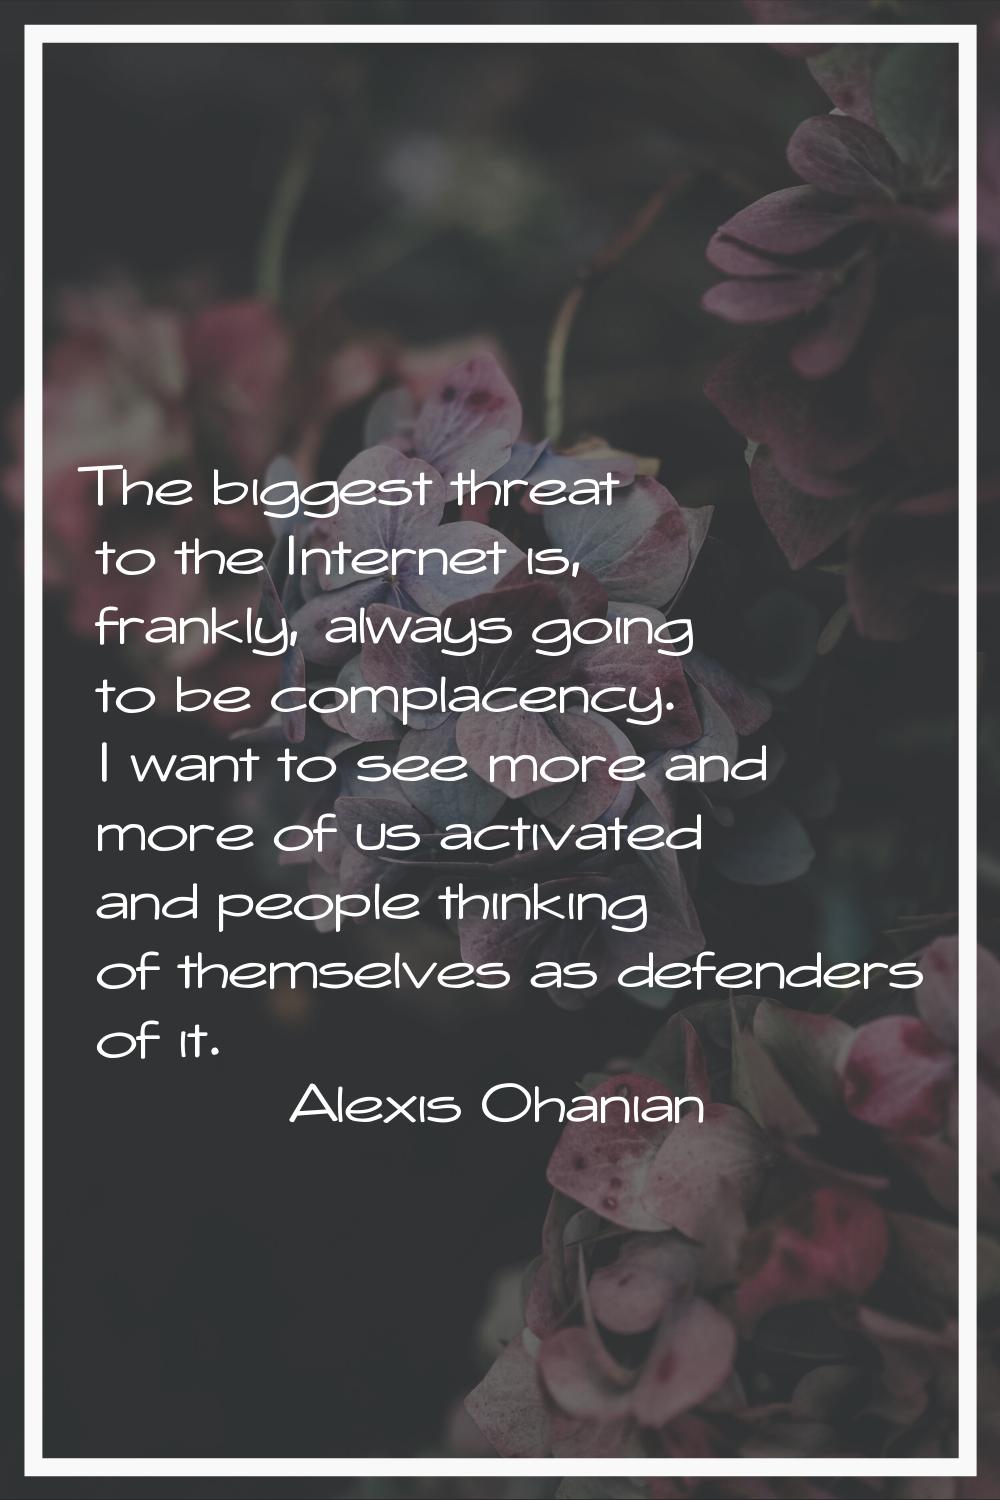 The biggest threat to the Internet is, frankly, always going to be complacency. I want to see more 